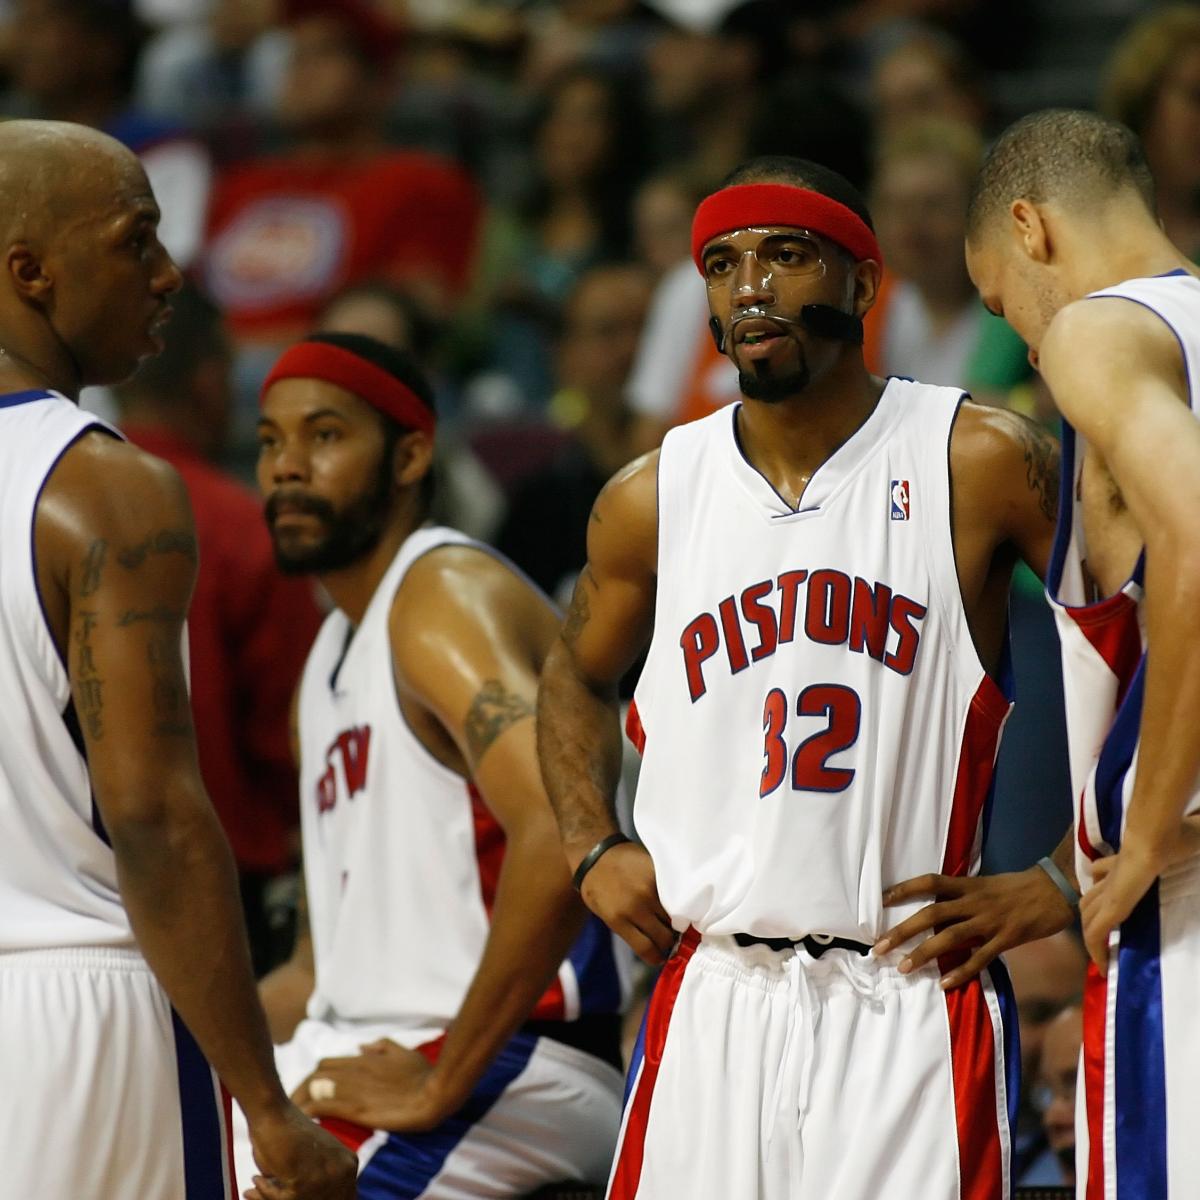 Prince helps Pistons win fifth straight